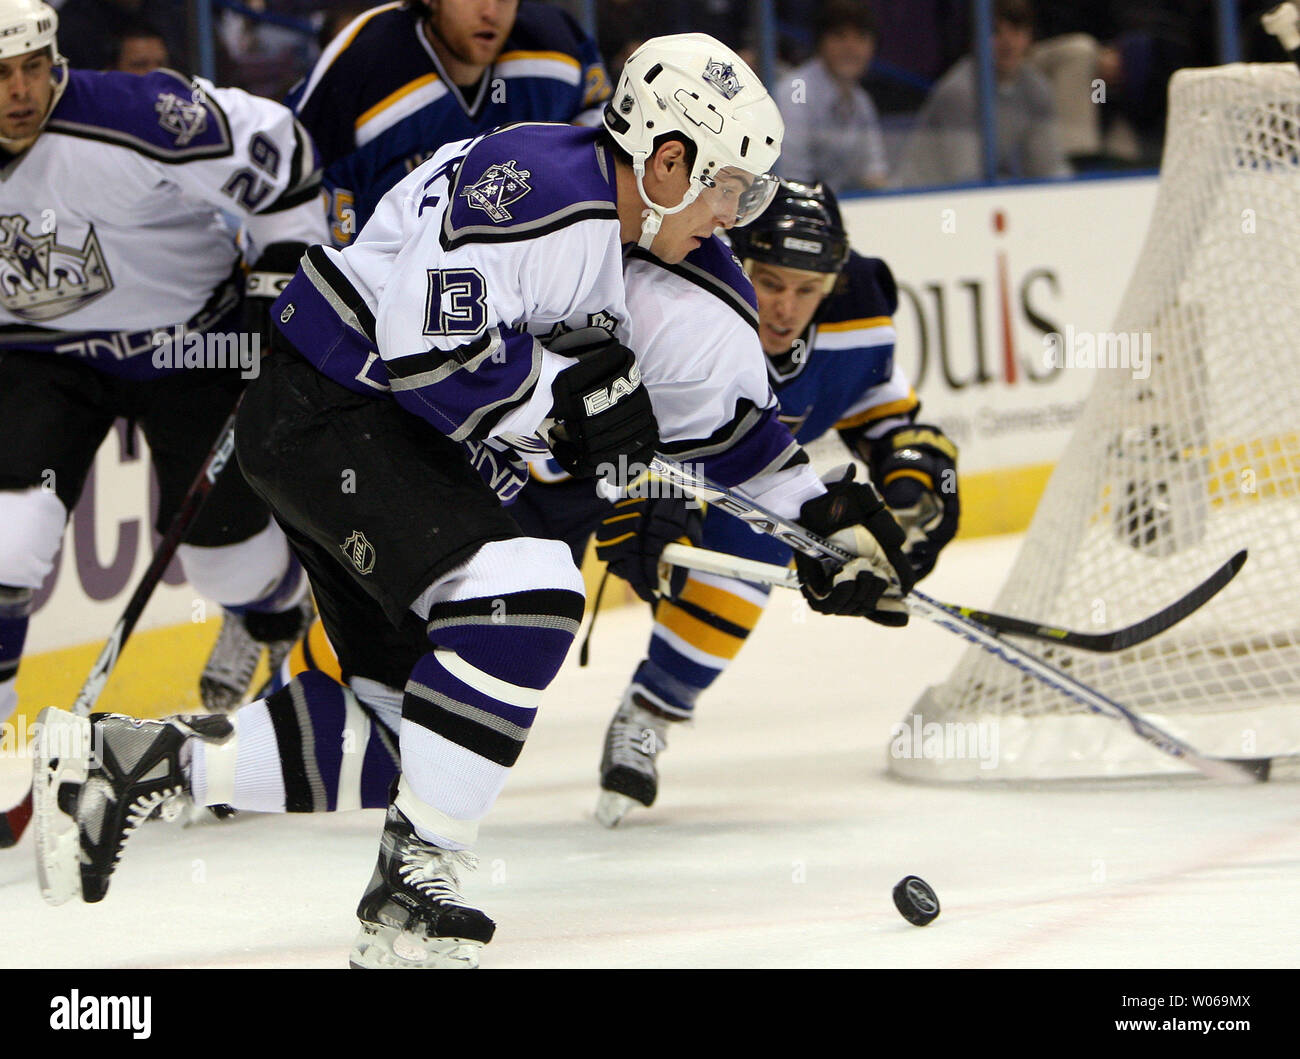 Los Angeles Kings Michael Cammalleri (13) works the puck to the front of the net as St. Louis Blues Ryan Johnson (R) dives to stop him during the first period at the Scottrade Center in St. Louis on December 21, 2006. (UPI Photo/Bill Greenblatt) Stock Photo